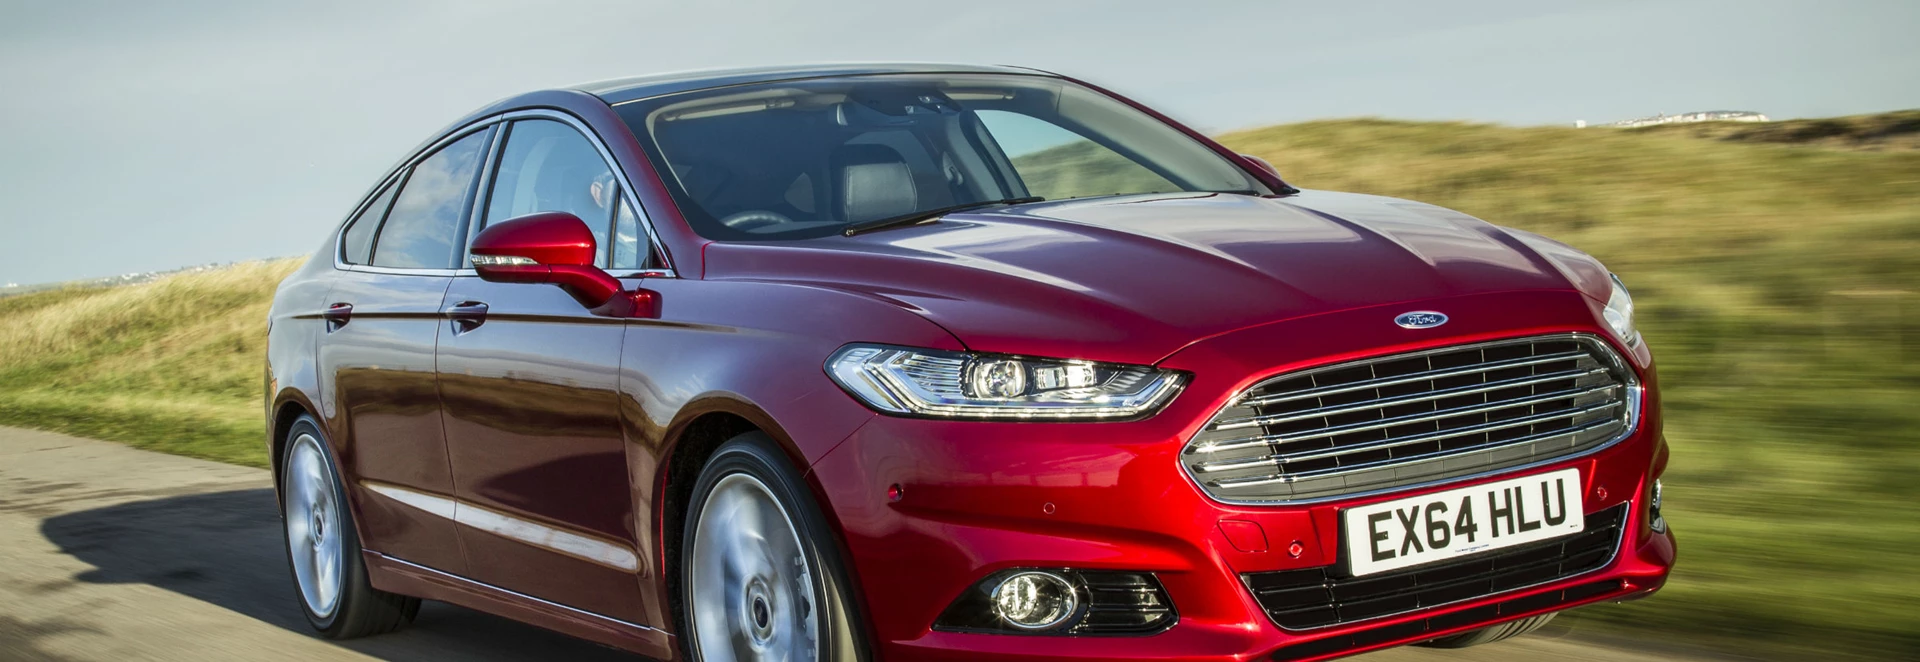 Ford Mondeo hatchback review 